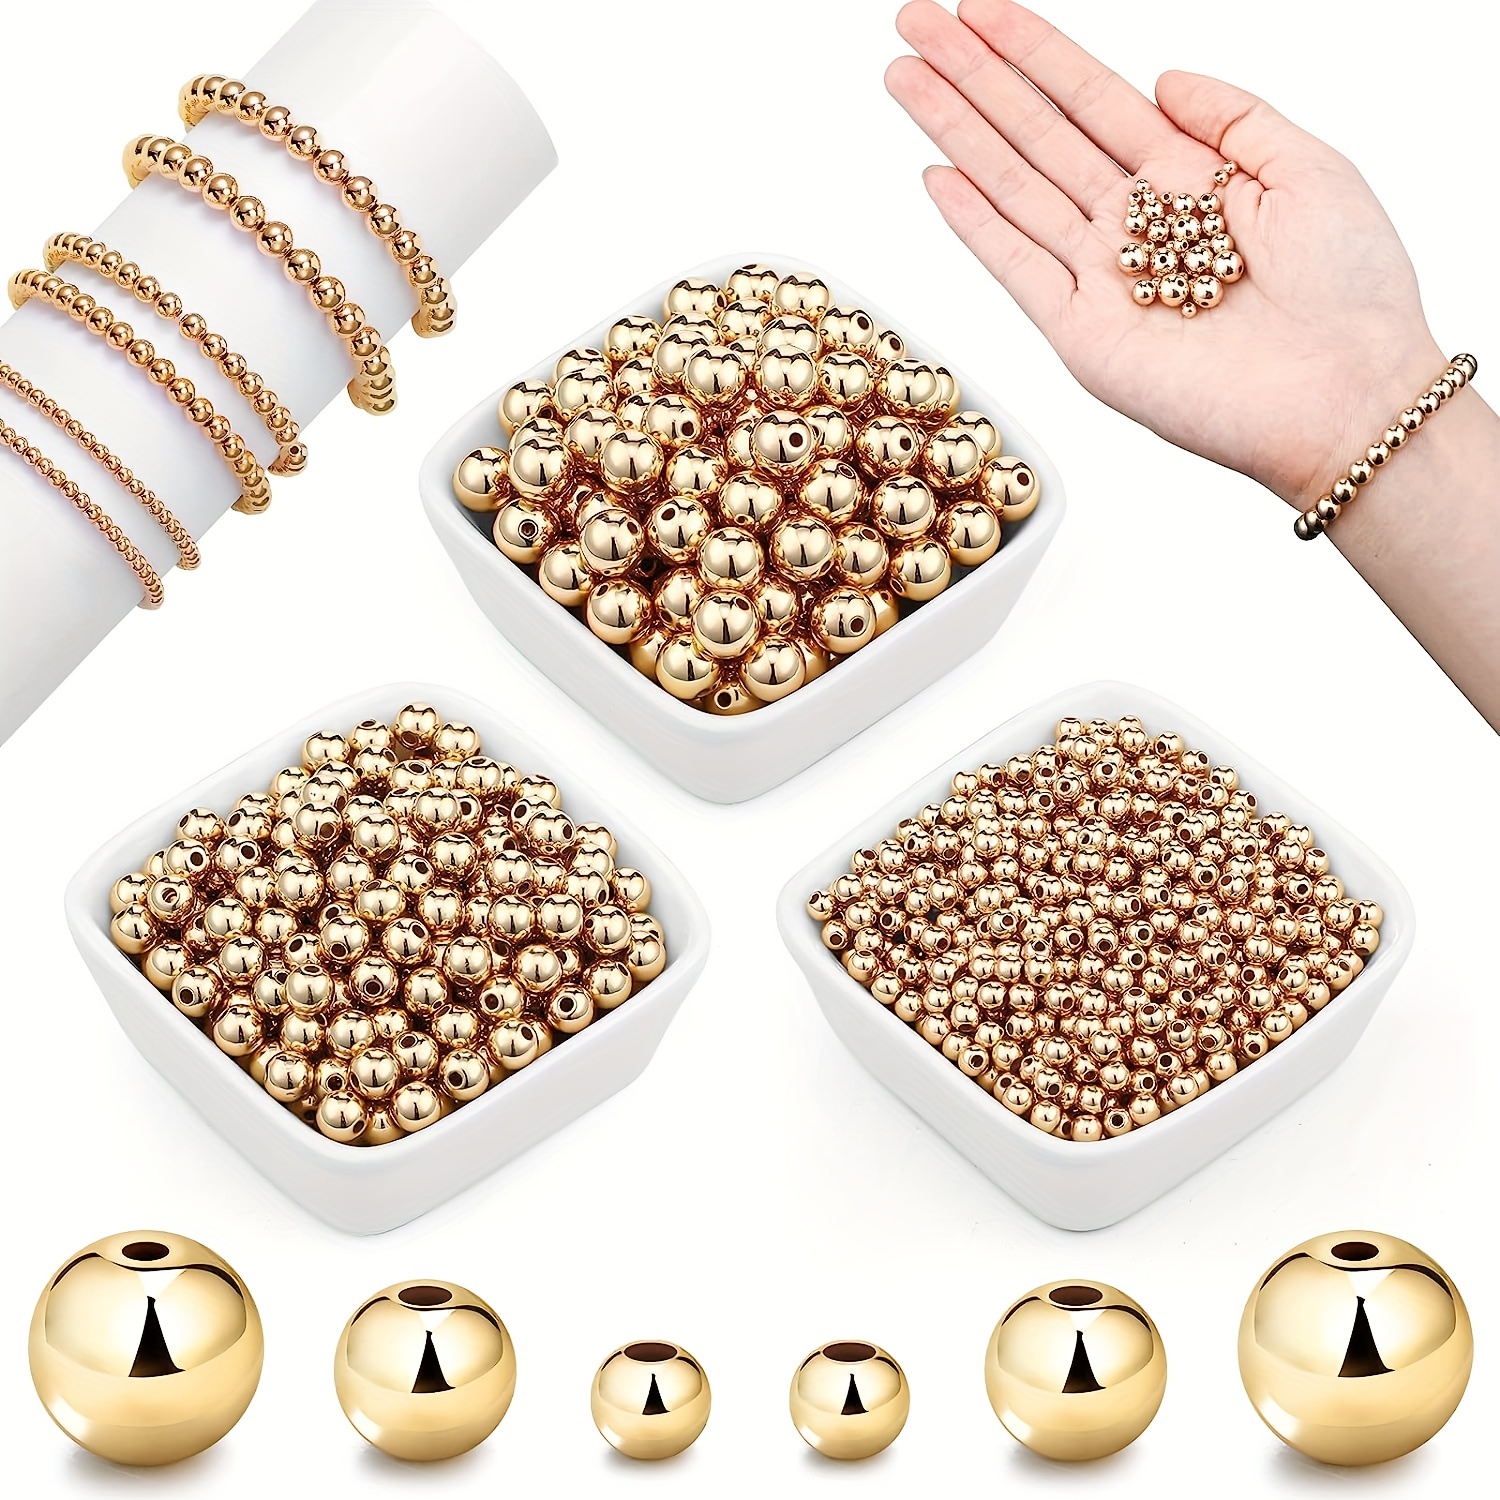 

1000pcs Golden Alloy Smooth Round Spacer Beads Brass Tarnish Resistant Seamless Loose Connector Beads Fashion For Diy Bracelet Necklace Handicrafts Small Business Jewelry Making Supplies